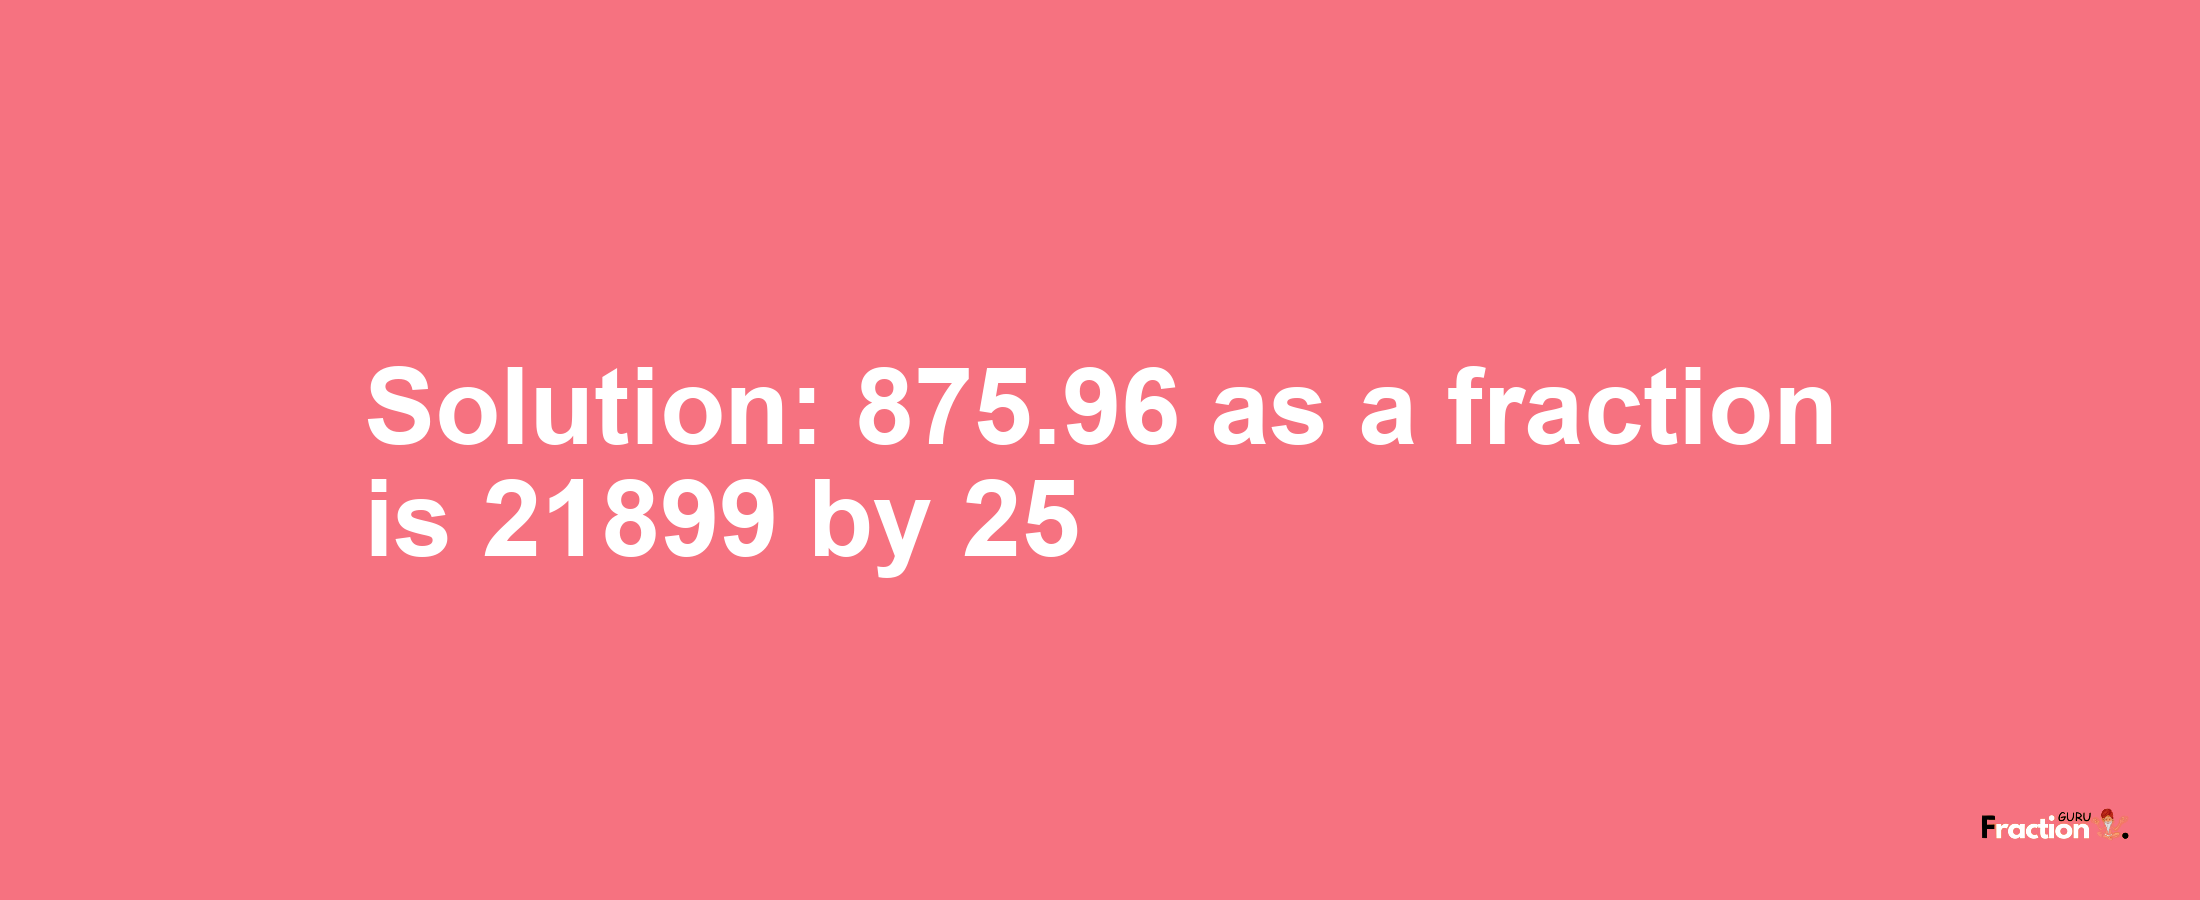 Solution:875.96 as a fraction is 21899/25